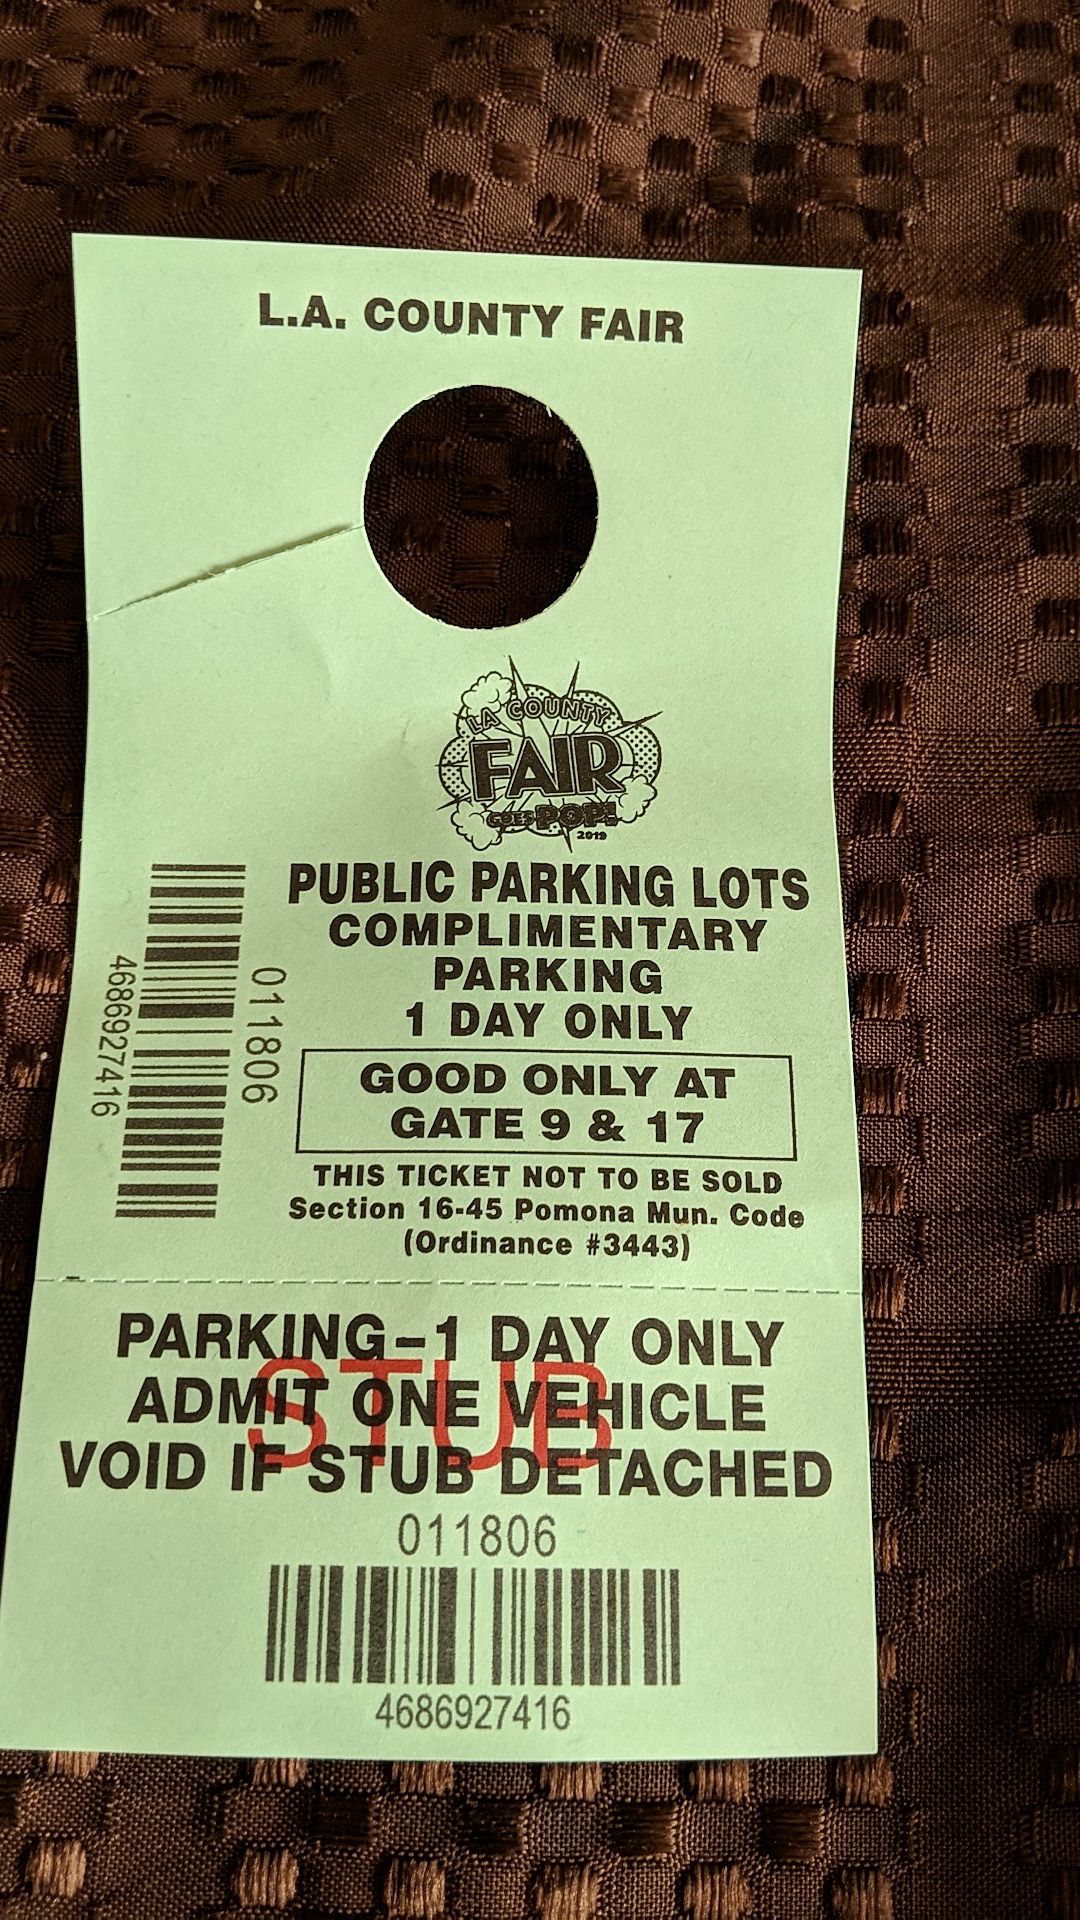 Free parking pass today is the last day u can use it